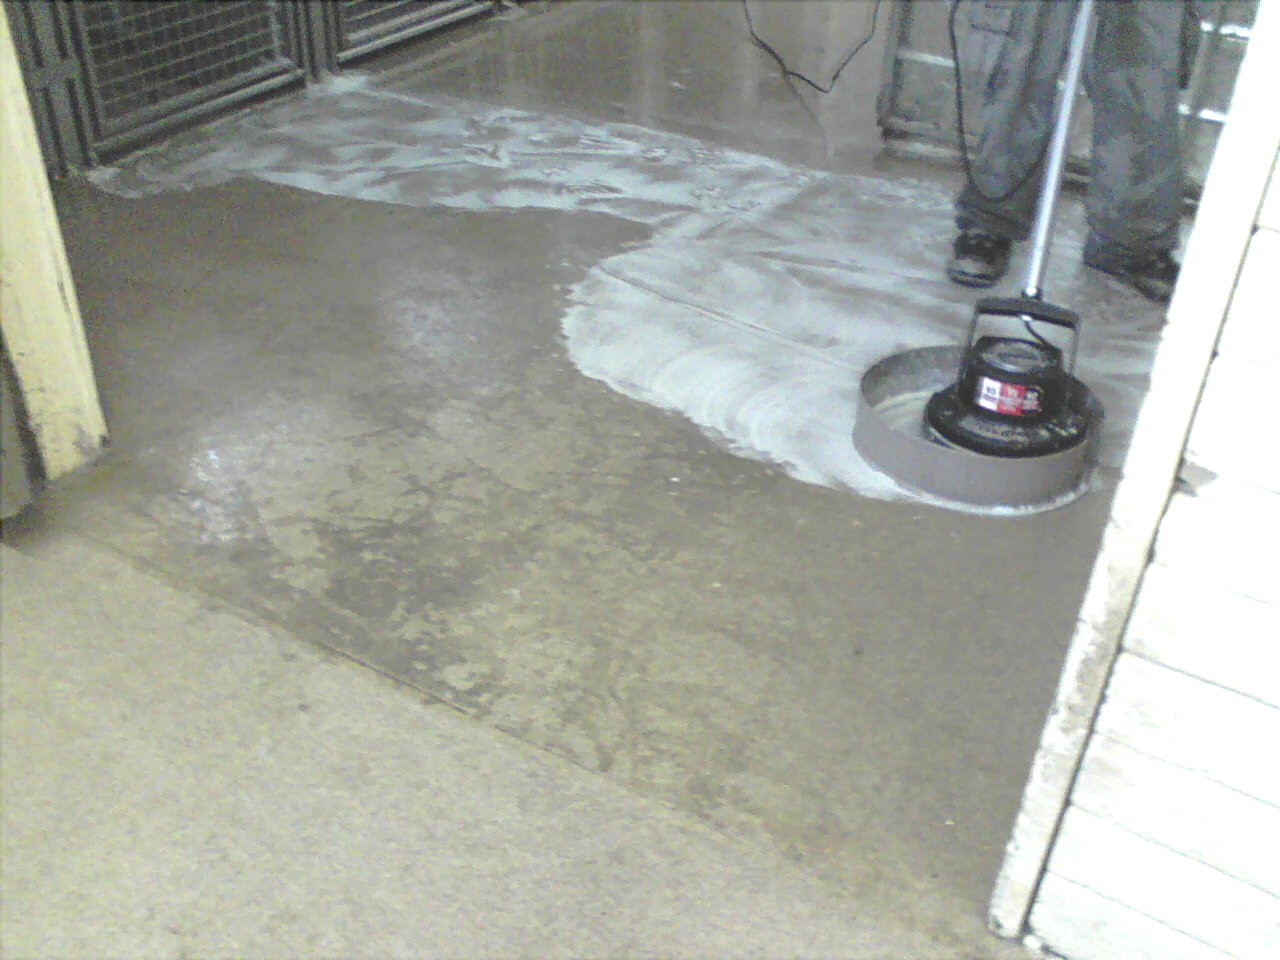 Kennel cleaner treating kennel floor with special flooring surface.